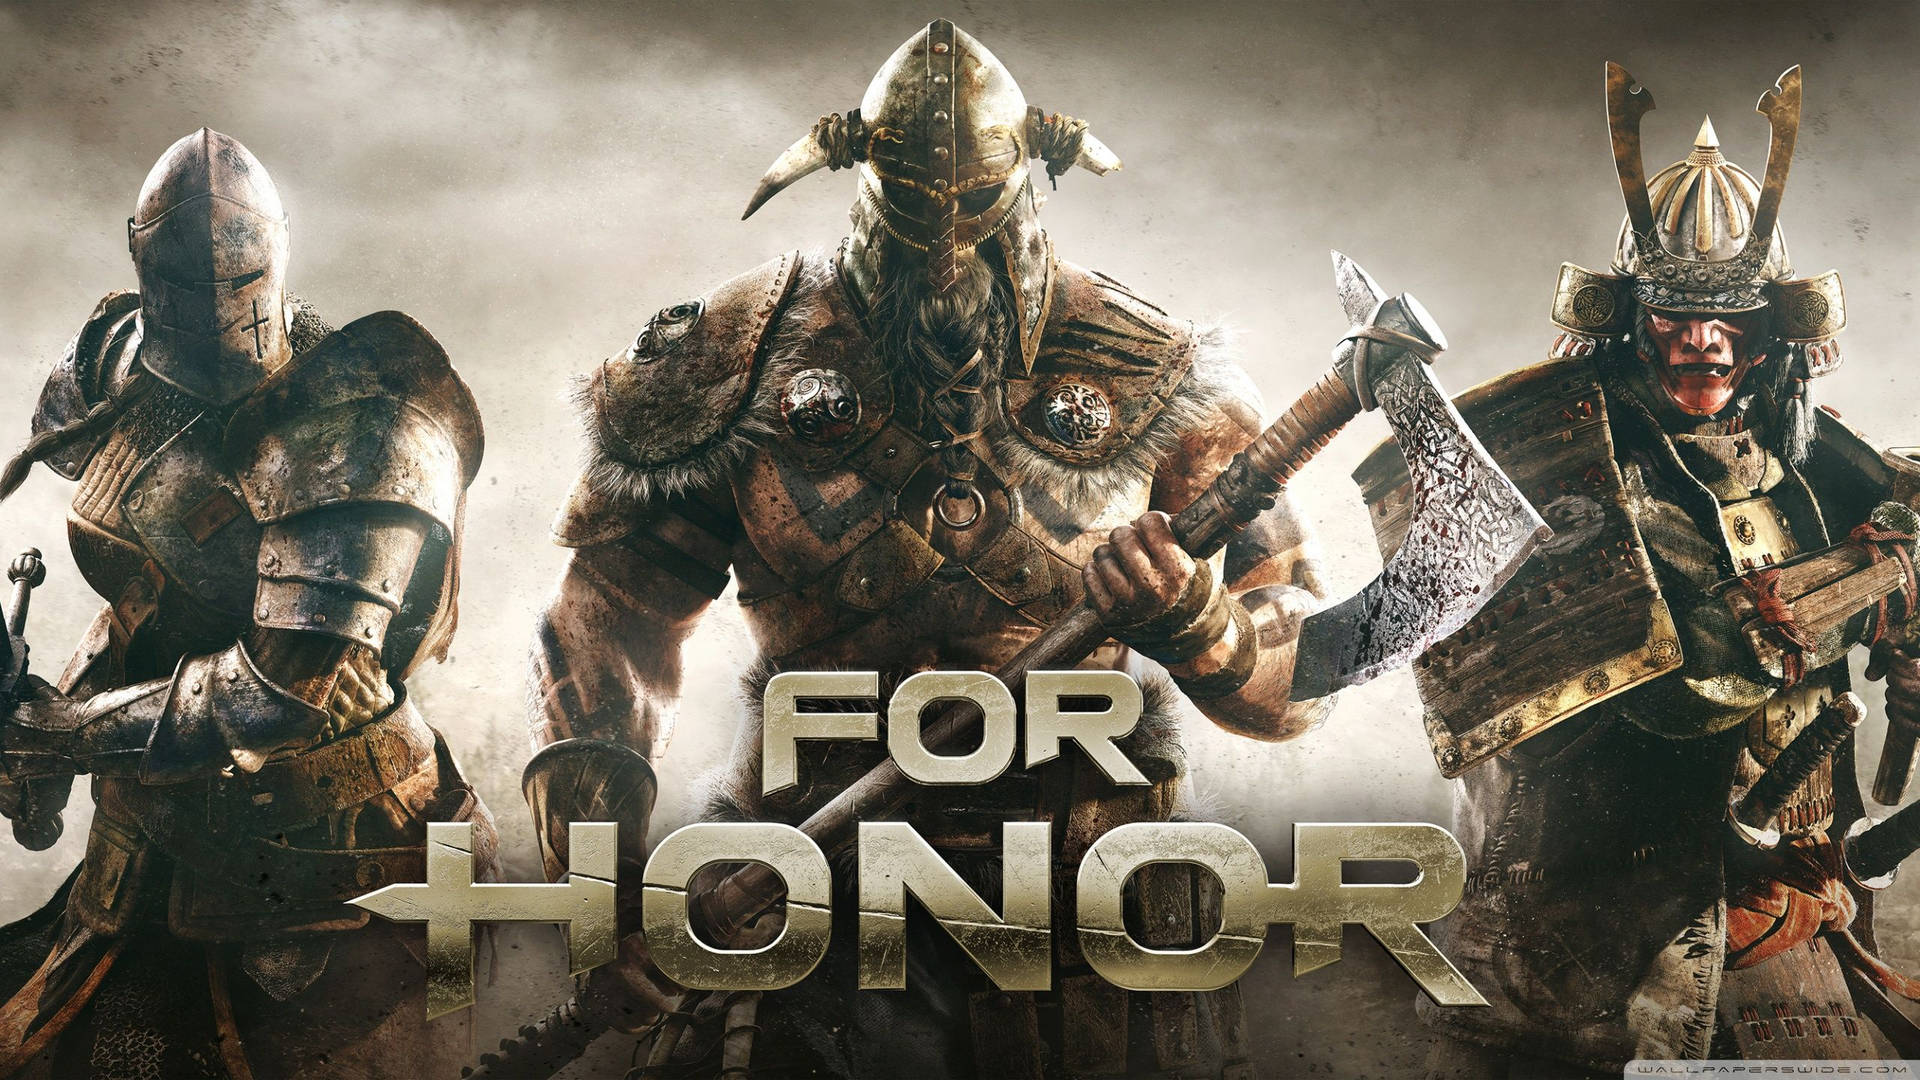 Free For Honor Wallpaper Downloads, [200+] For Honor Wallpapers for FREE |  